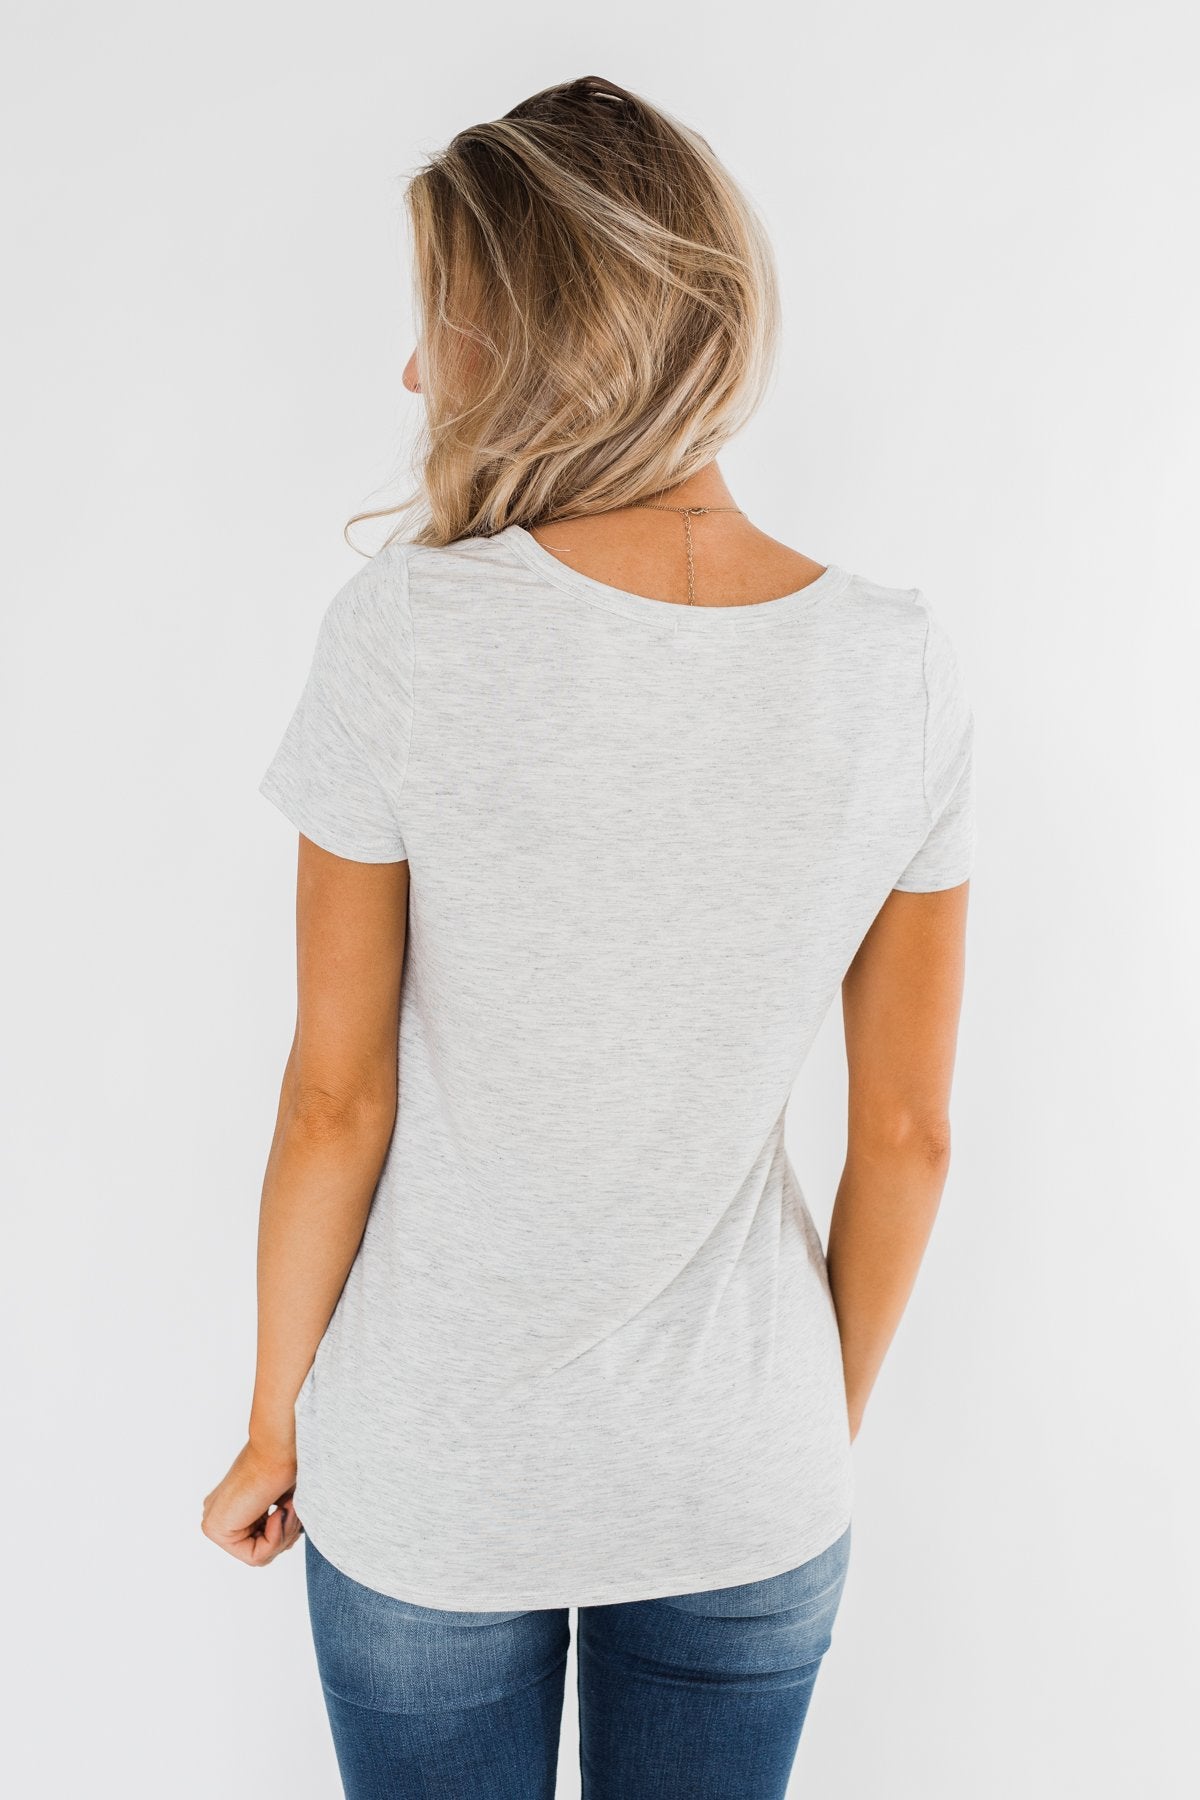 This is Me Notch Pocket Top- Light Heather Grey